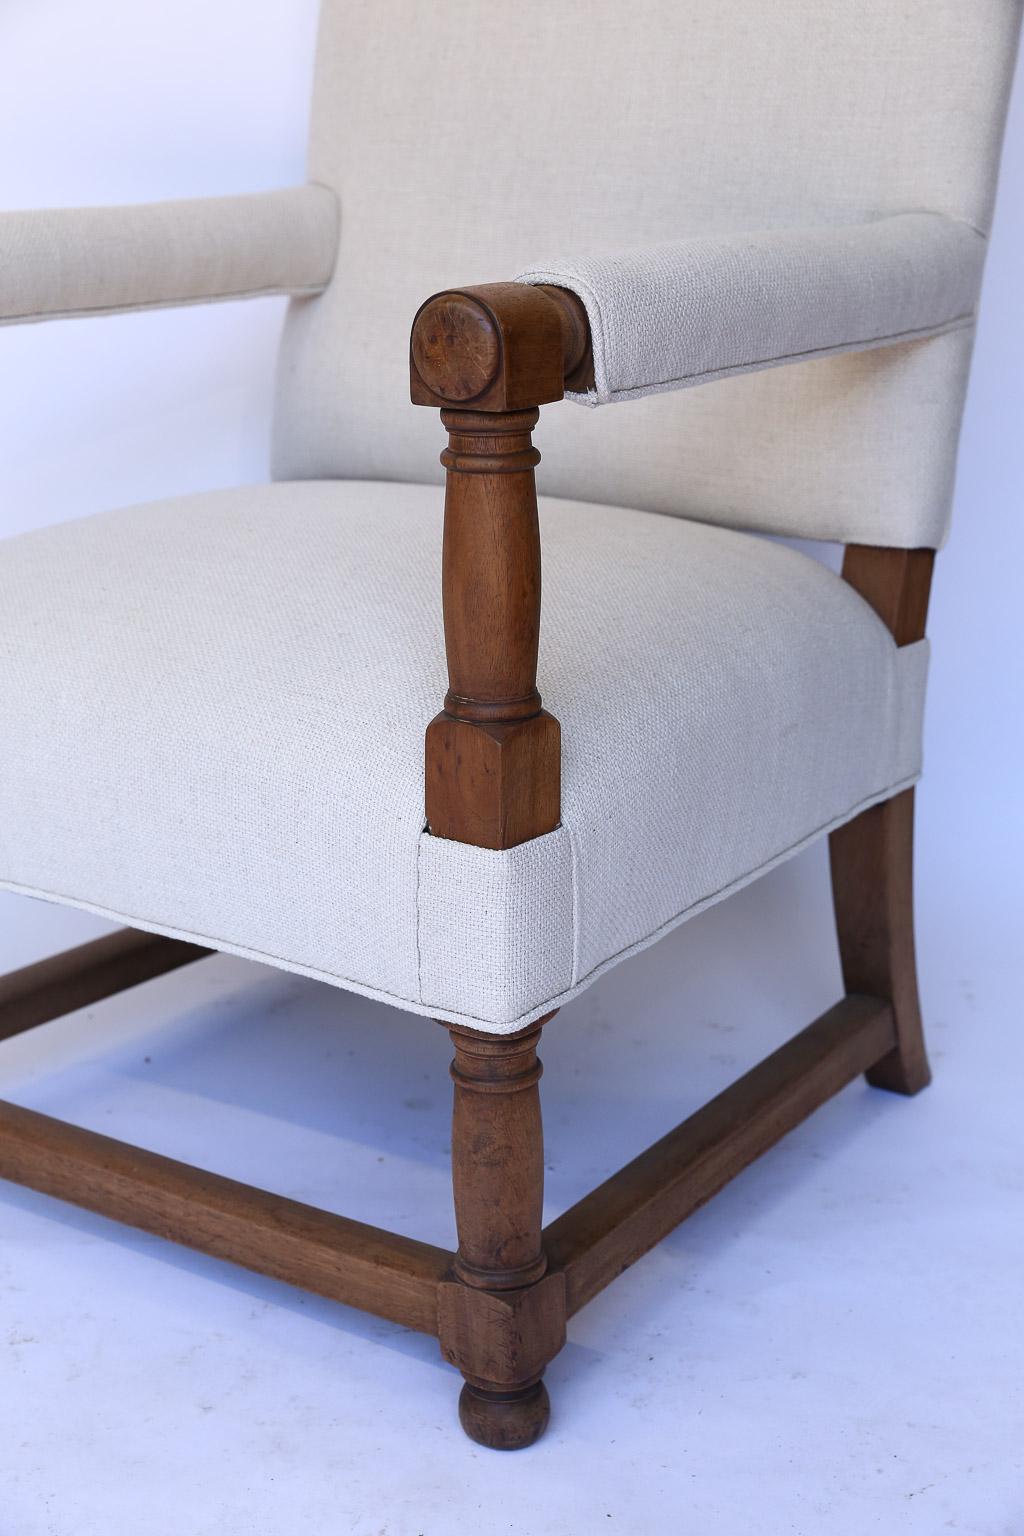 This is a pair of antique French newly upholstered armchairs. With new padding and fill, off white linen blend fabric they are sturdy and comfortable.